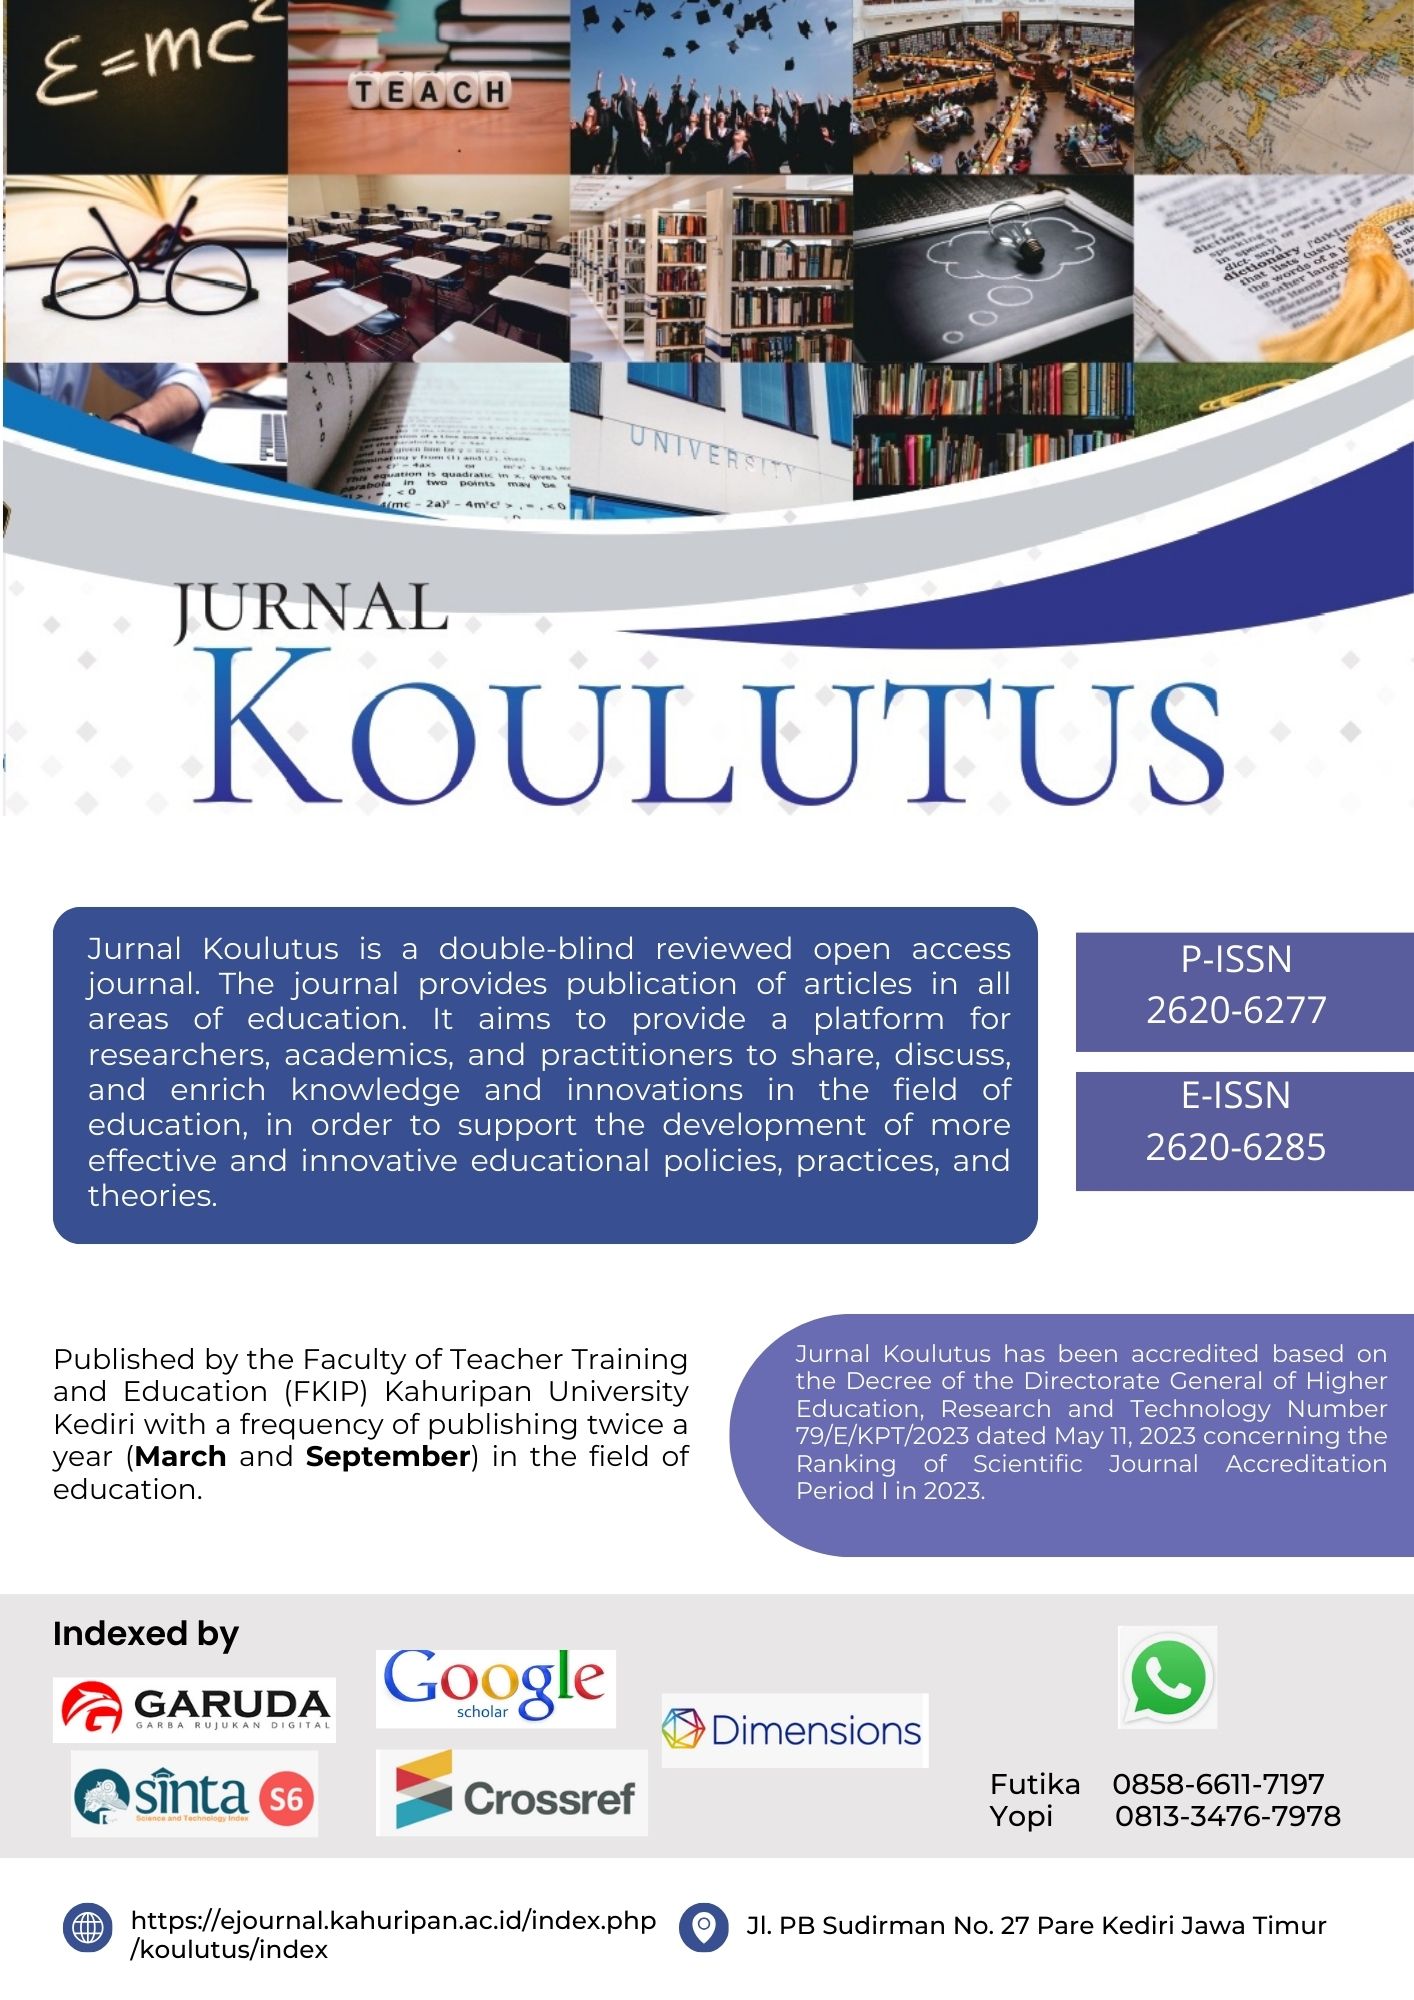 Jurnal Koulutus ISSN: (online) 2620-6285  Publisher: Fakultas Keguruan dan Ilmu Pendidikan Universitas Kahuripan Kediri Accreditation Number : No. 79/E/KPT/2023 (SINTA 6) URL: https://ejournal.kahuripan.ac.id/index.php/koulutus/index Jurnal Koulutus is a double-blind reviewed open access journal. The journal provides publication of articles in all areas of education. It aims to provide a platform for researchers, academics, and practitioners to share, discuss, and enrich knowledge and innovations in the field of education, in order to support the development of more effective and innovative educational policies, practices, and theories.  Published by the Faculty of Teacher Training and Education (FKIP) Kahuripan University Kediri with a frequency of publishing twice a year (March and September) in the field of education.  Jurnal Koulutus has been accredited based on the Decree of the Directorate General of Higher Education, Research and Technology Number 79/E/KPT/2023 dated May 11, 2023 concerning the Ranking of Scientific Journal Accreditation Period I in 2023.